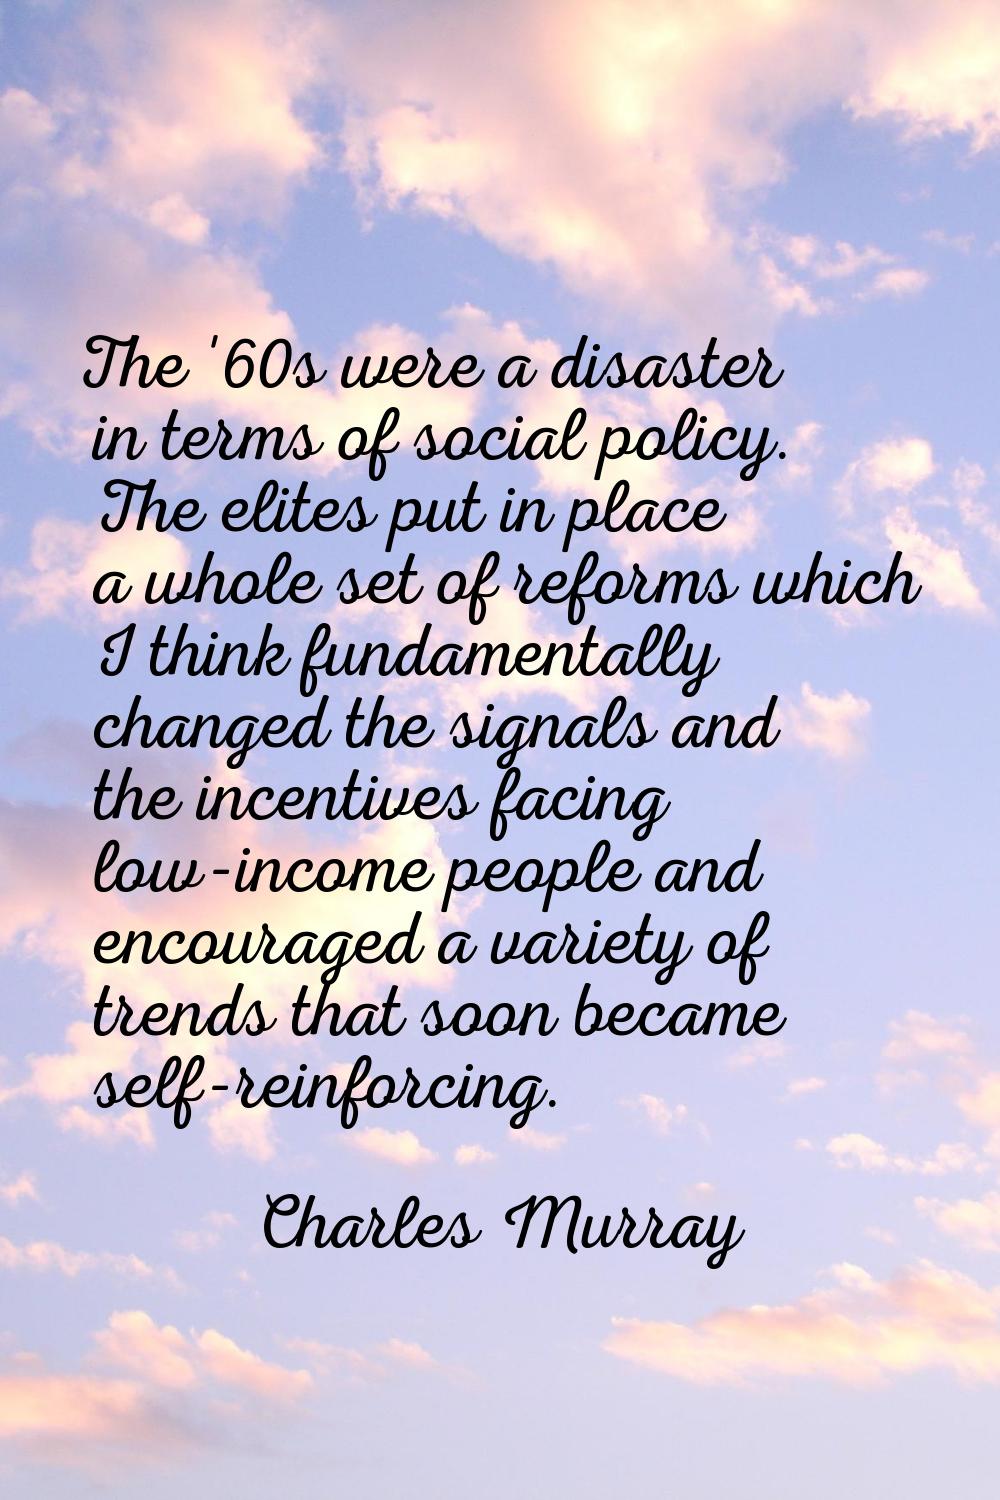 The '60s were a disaster in terms of social policy. The elites put in place a whole set of reforms 